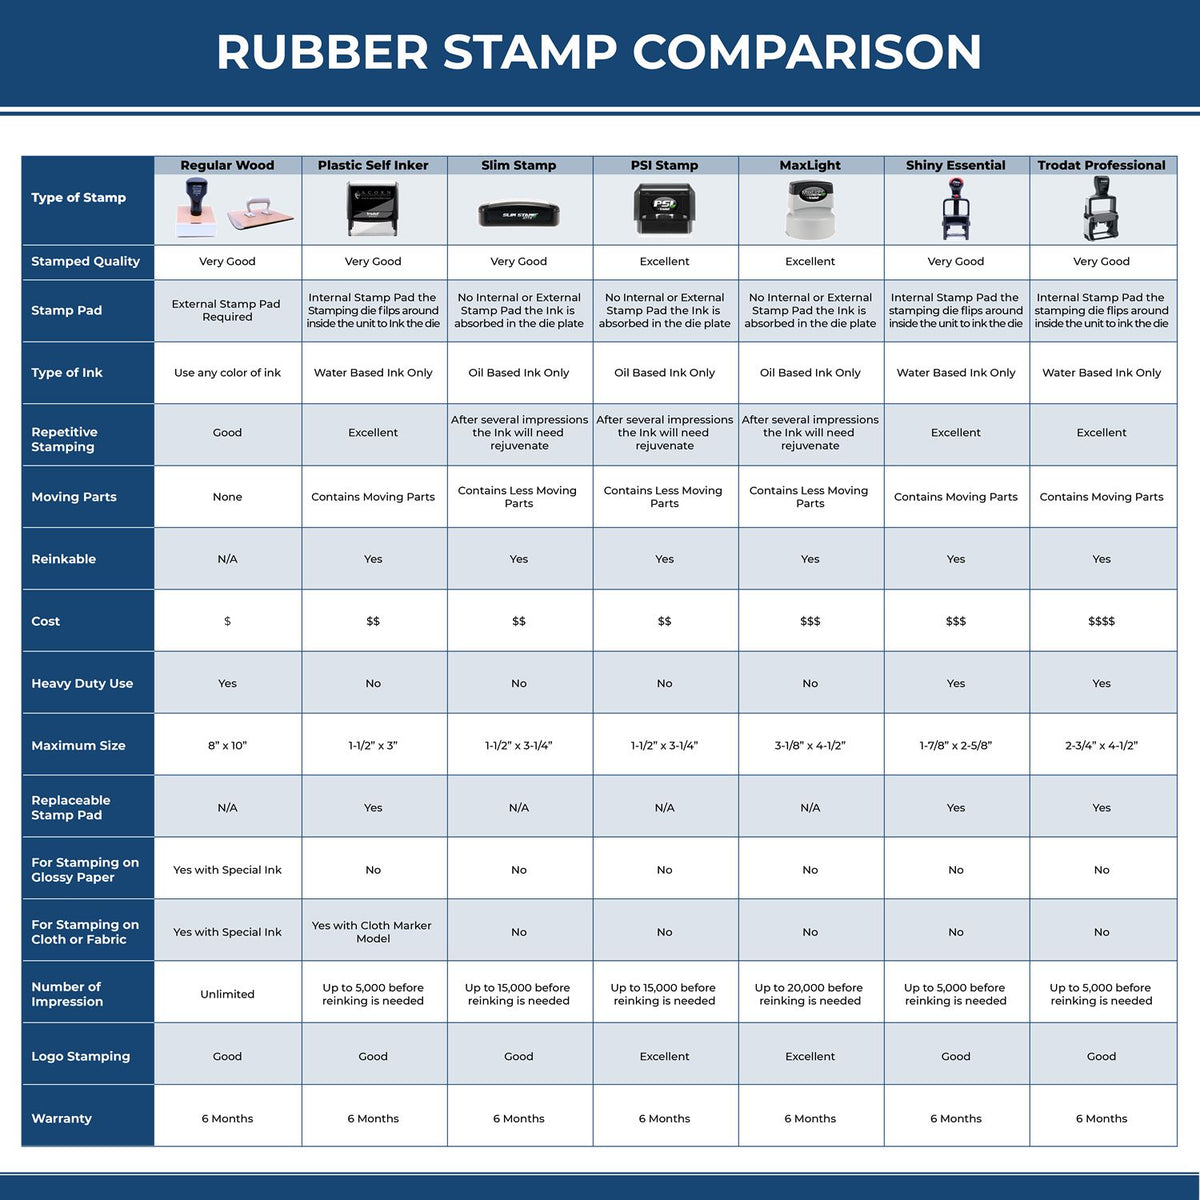 A comparison chart for the different types of mount models available for the Alabama Professional Engineer Seal Stamp.